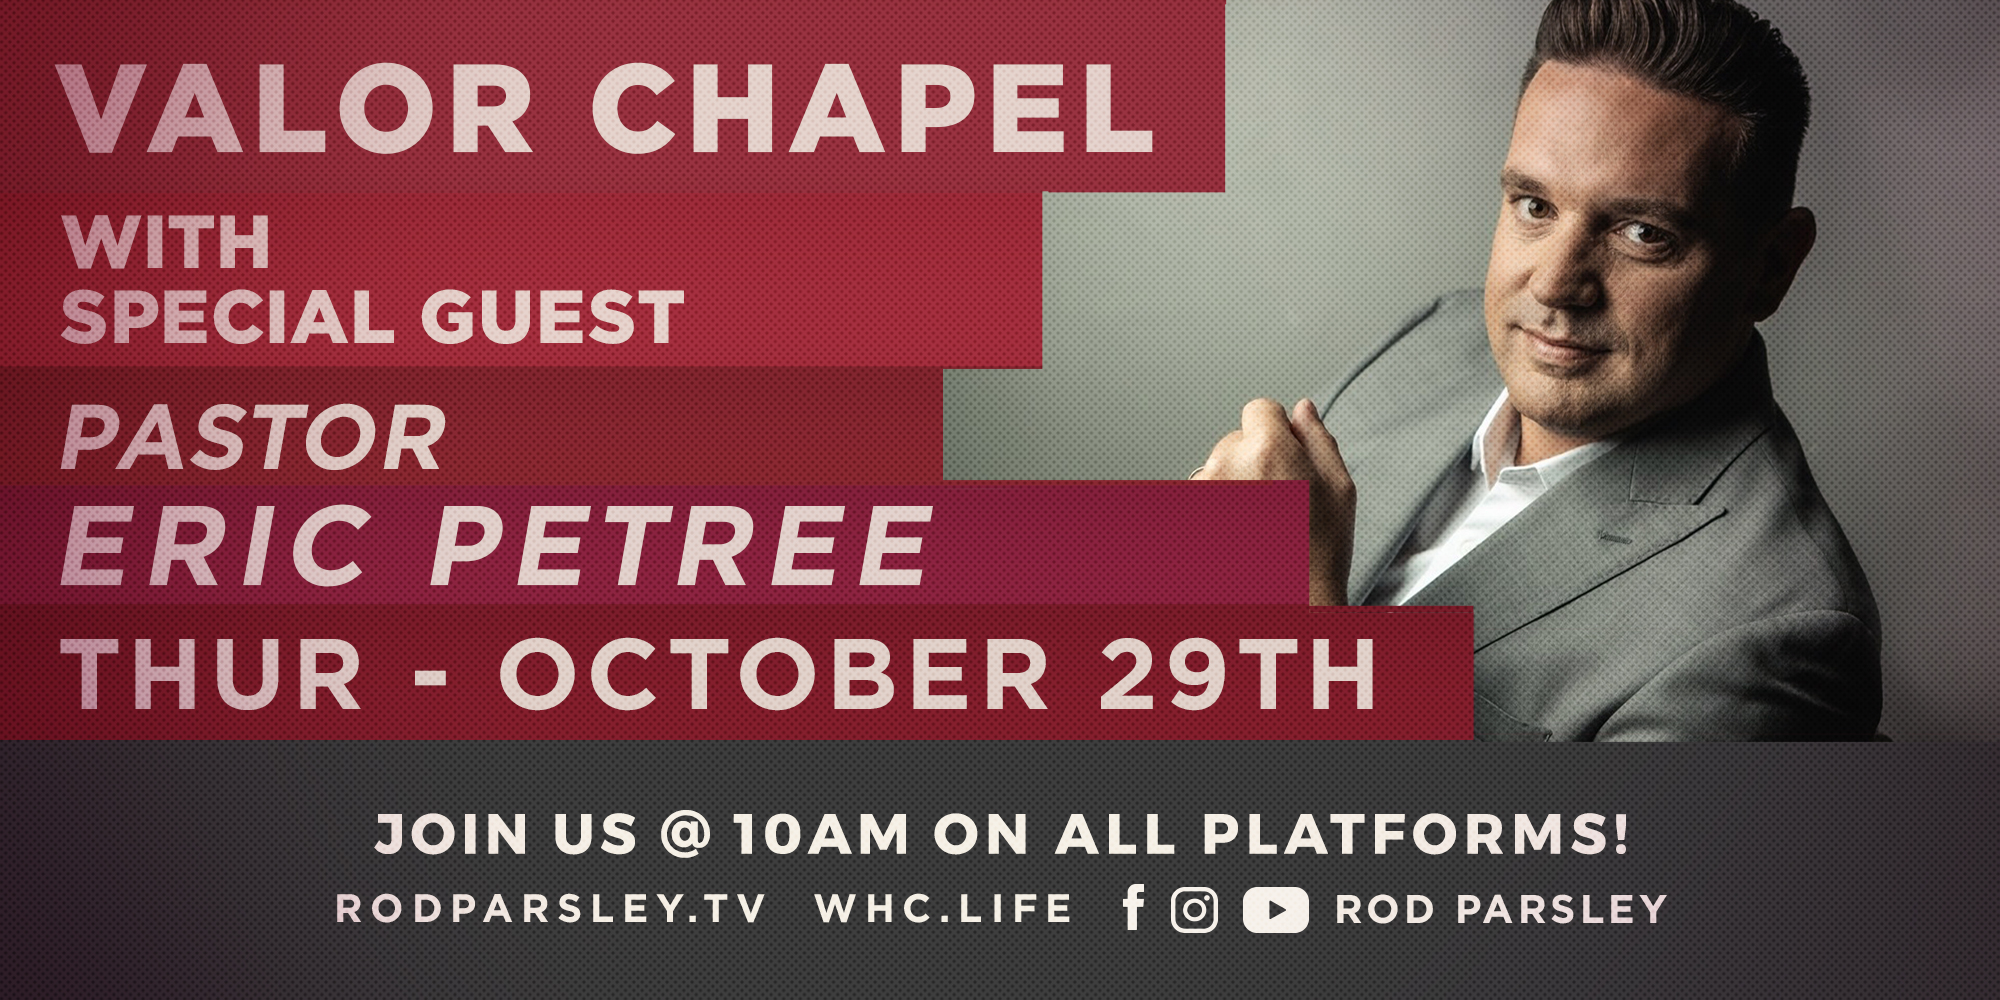 Valor Chapel Service Watch Live Thrusdays at 10am Et Join Us on All Platforms! Rodpasley.Tv · Whc.Life · Facebook Instagram Youtube Rod Parsley